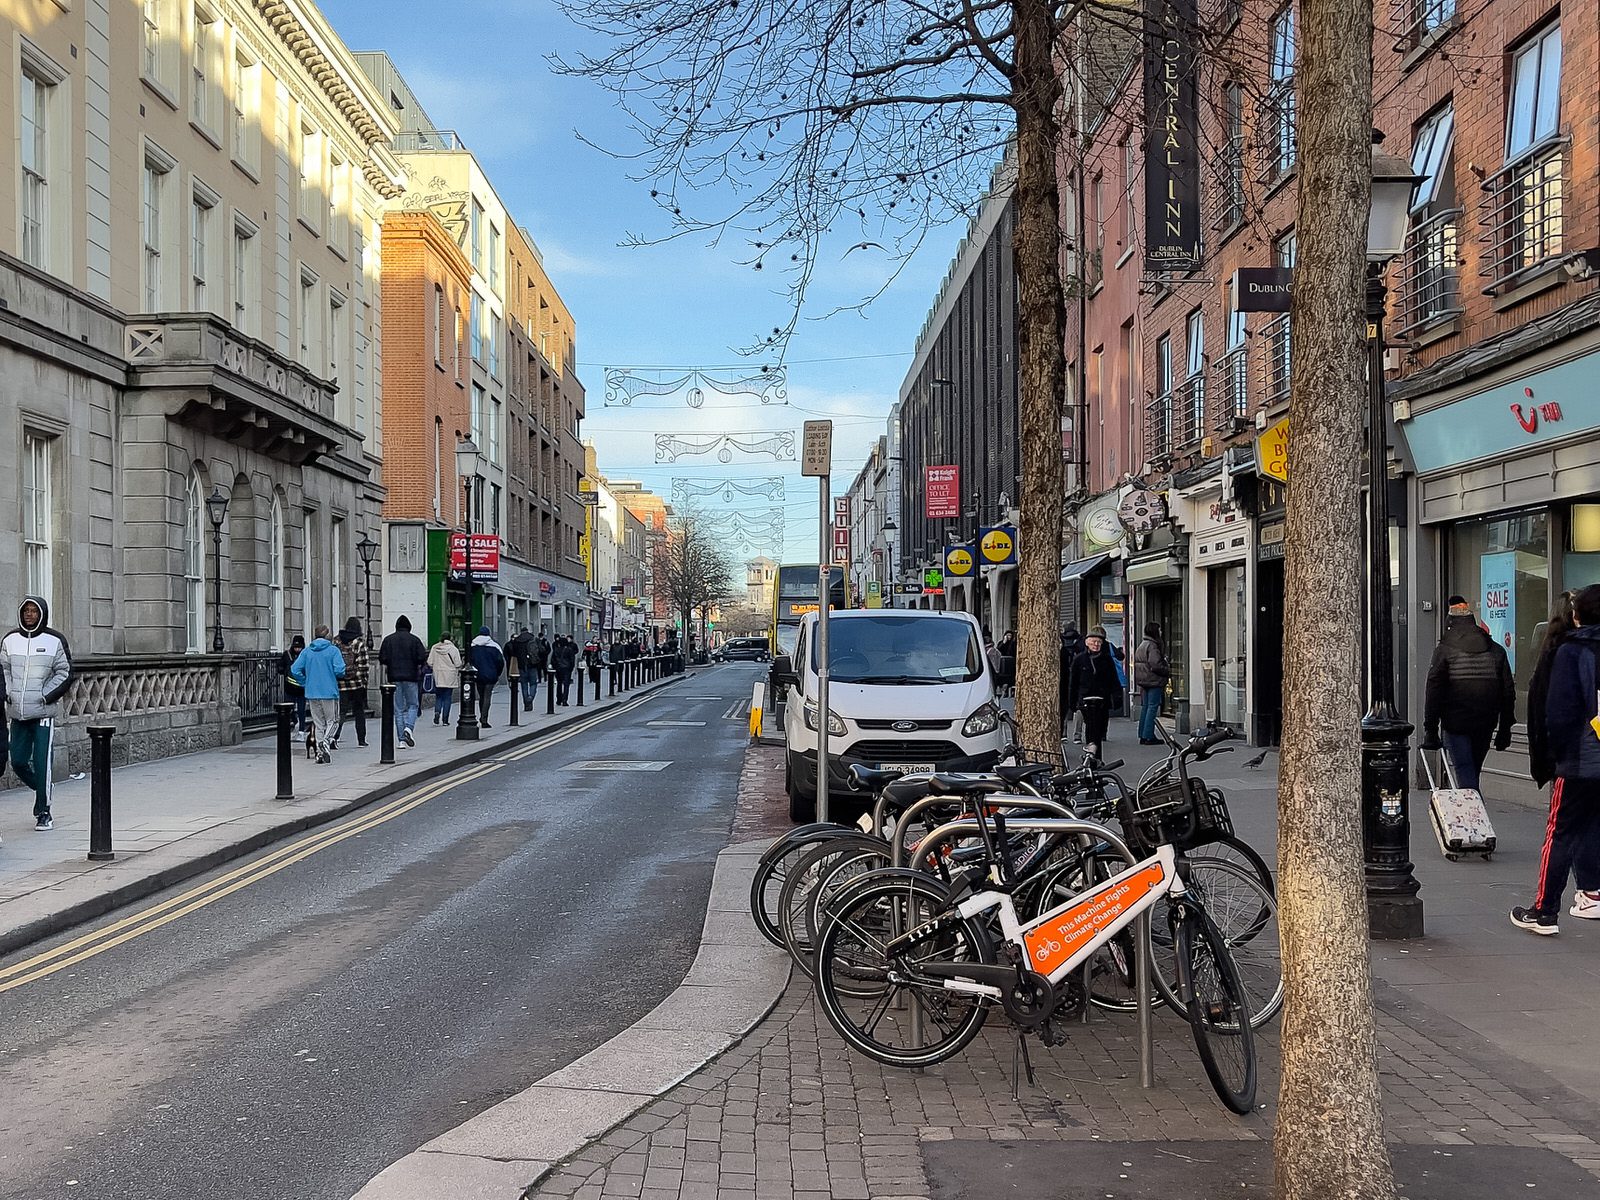 TALBOT STREET [FAILS TO MEET ITS POTENTIAL AS A MAJOR SHOPPING STREET]-225721-1